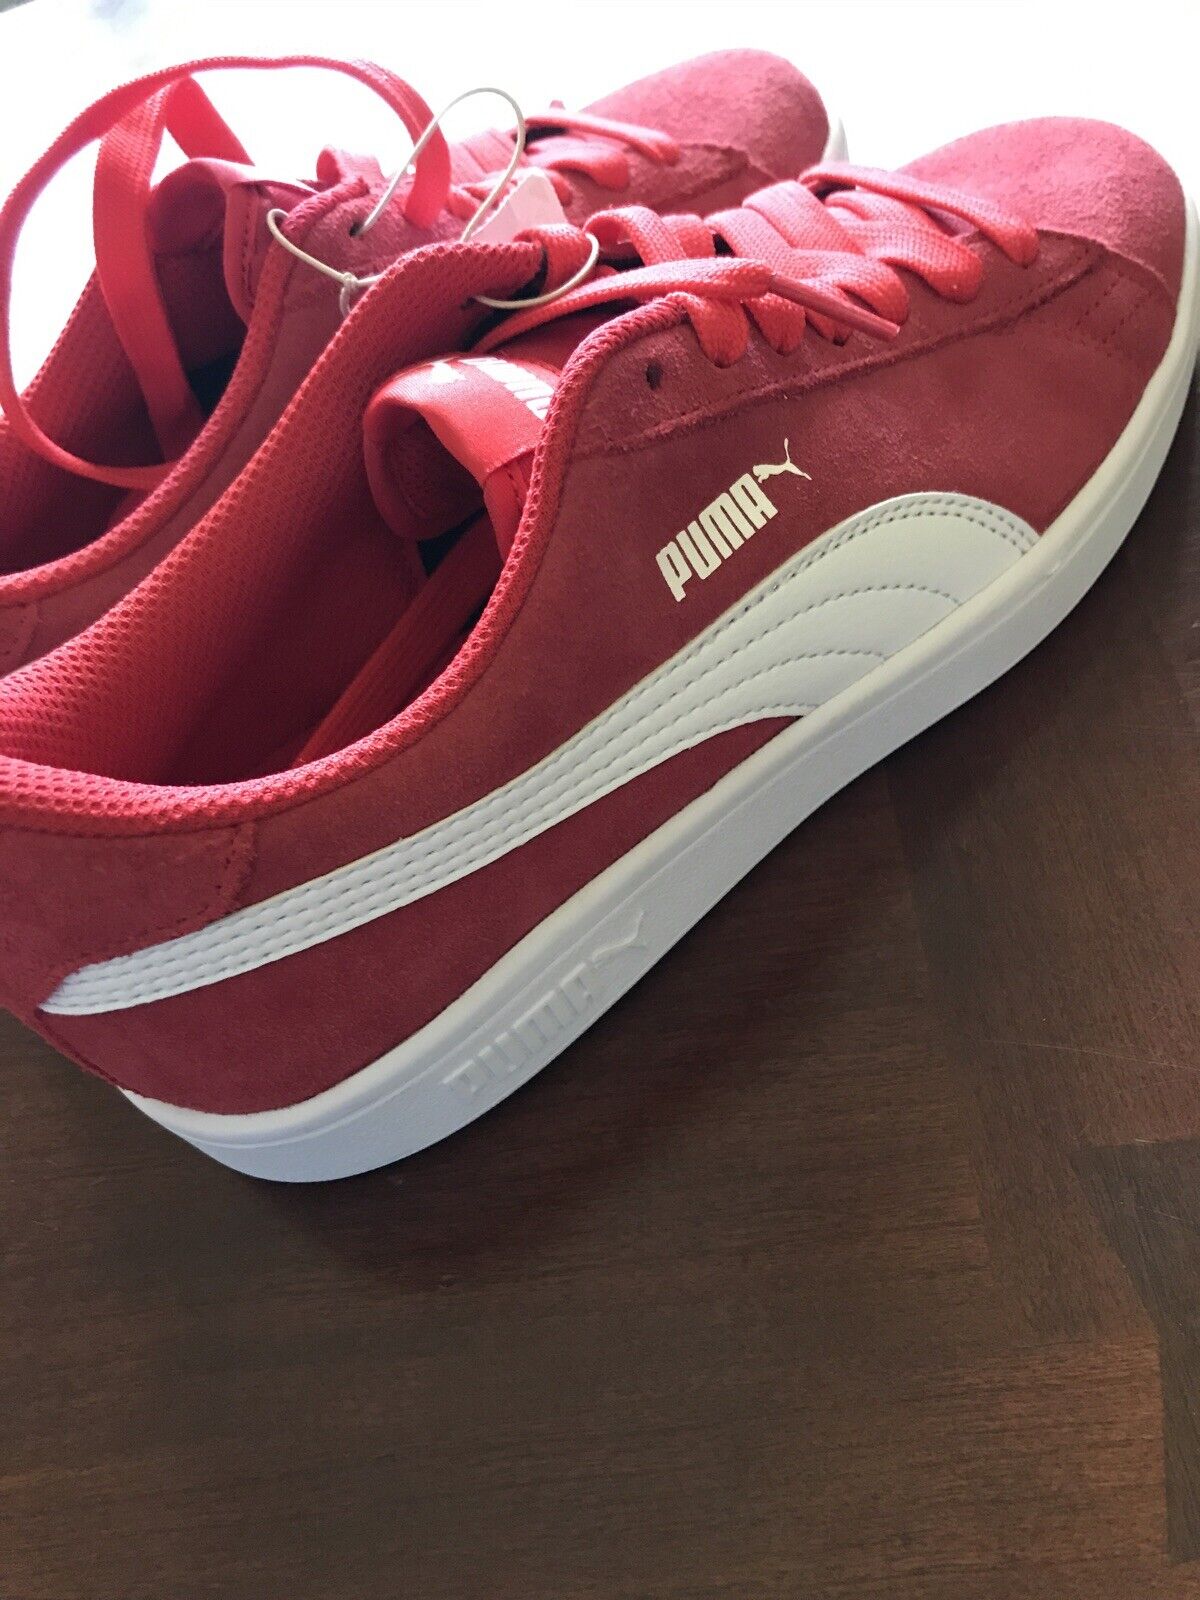 puma suede trainers size 6